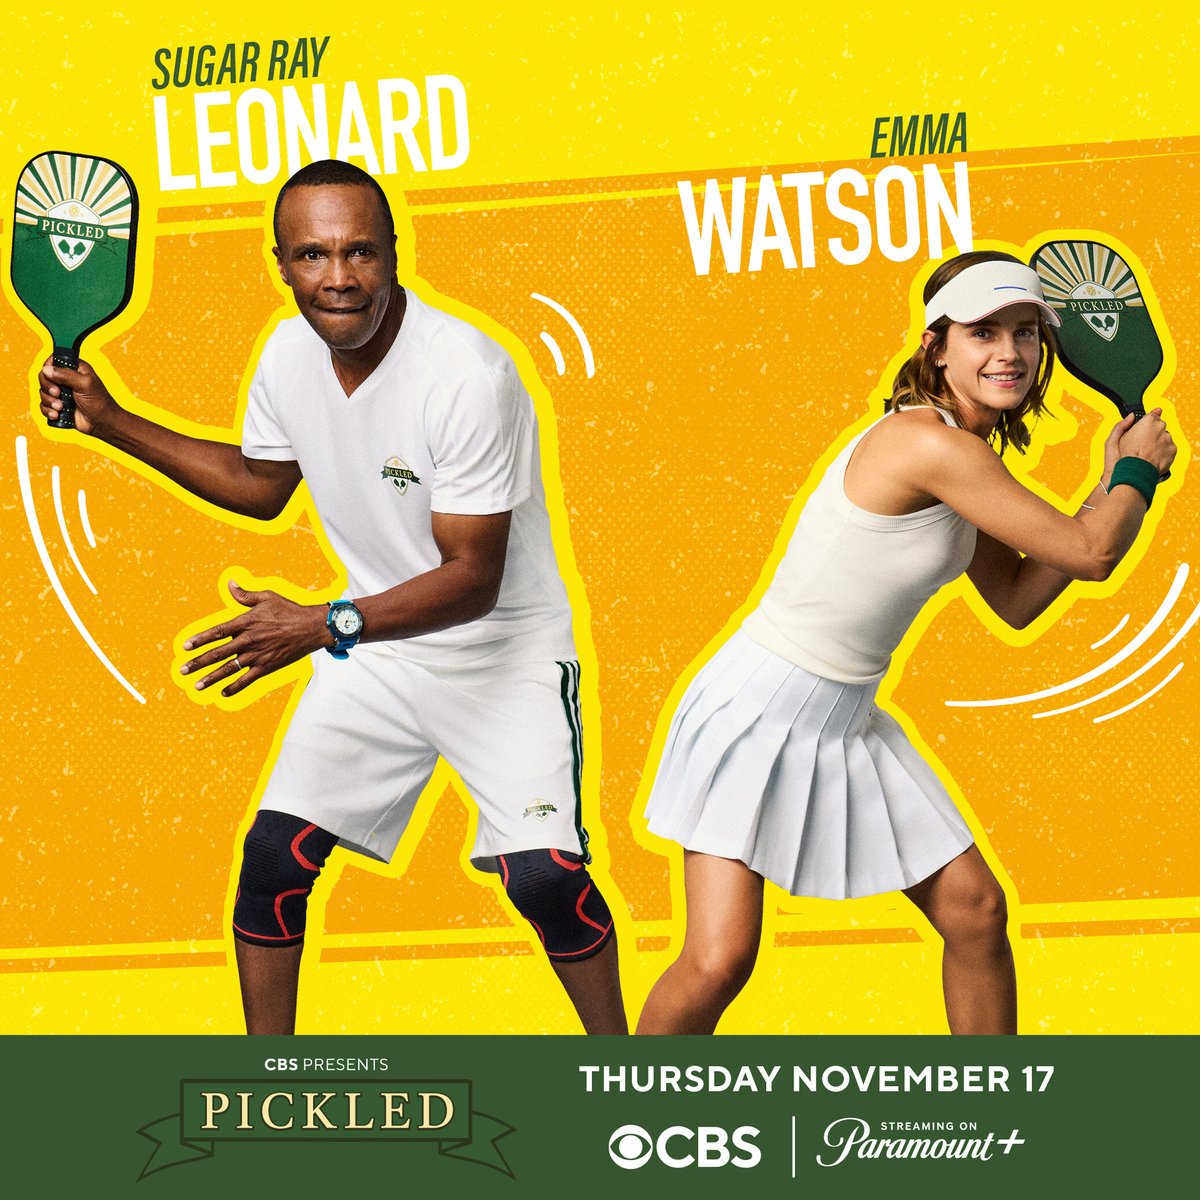 Hey @EmmaWatson, see you on the court! #PICKLED airs November 17th on @cbs #TheVolleyRanchers